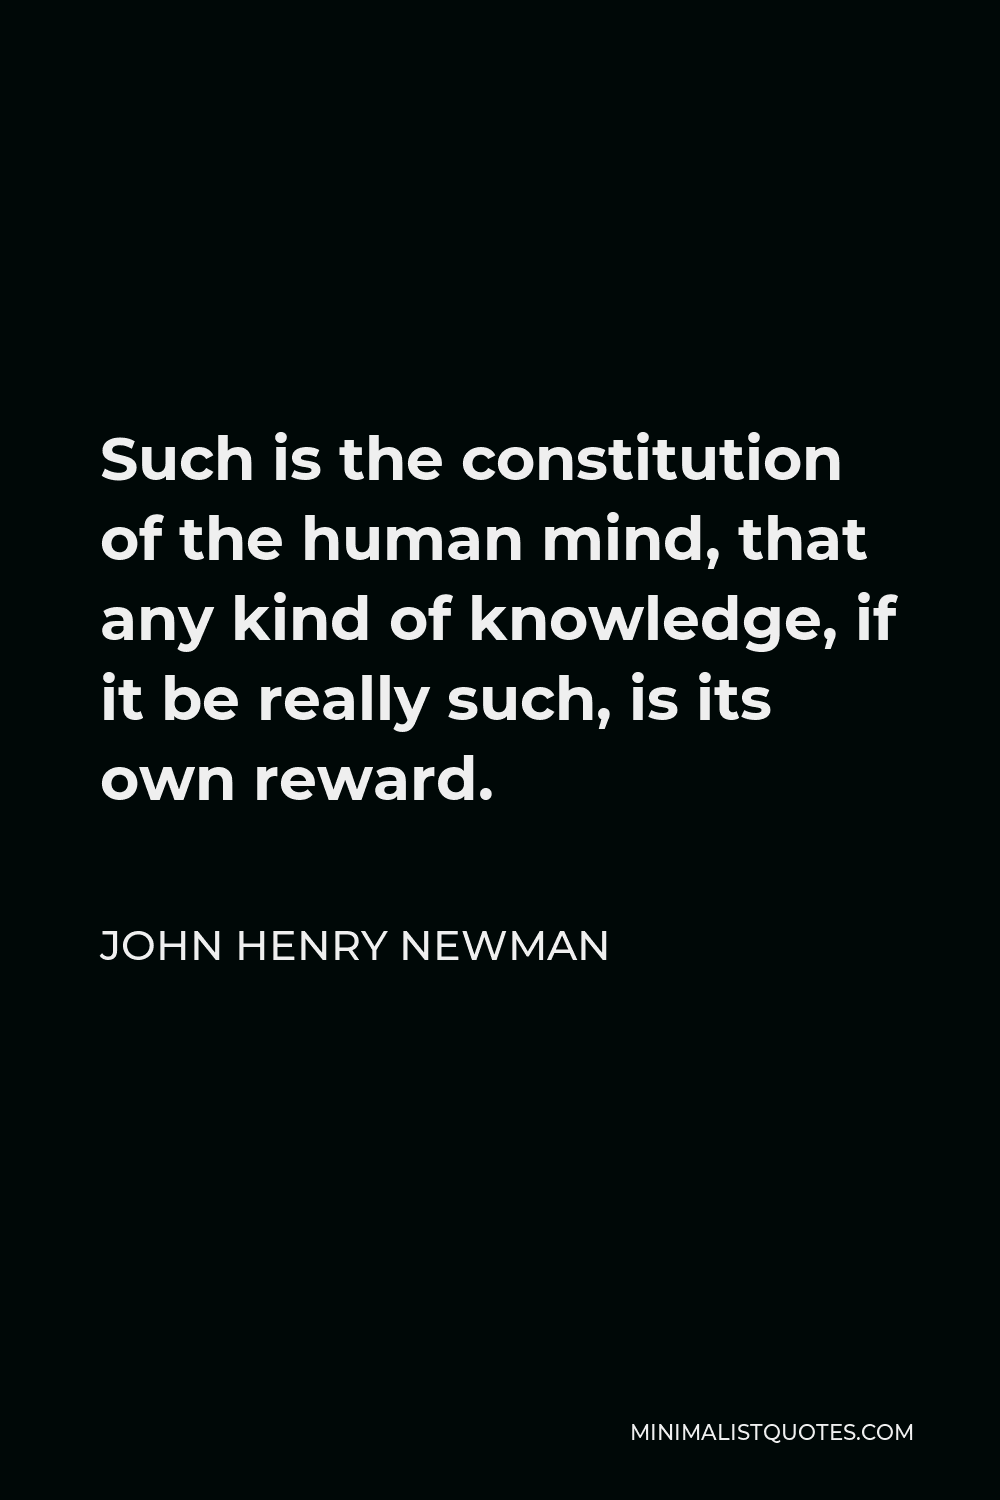 John Henry Newman Quote - Such is the constitution of the human mind, that any kind of knowledge, if it be really such, is its own reward.